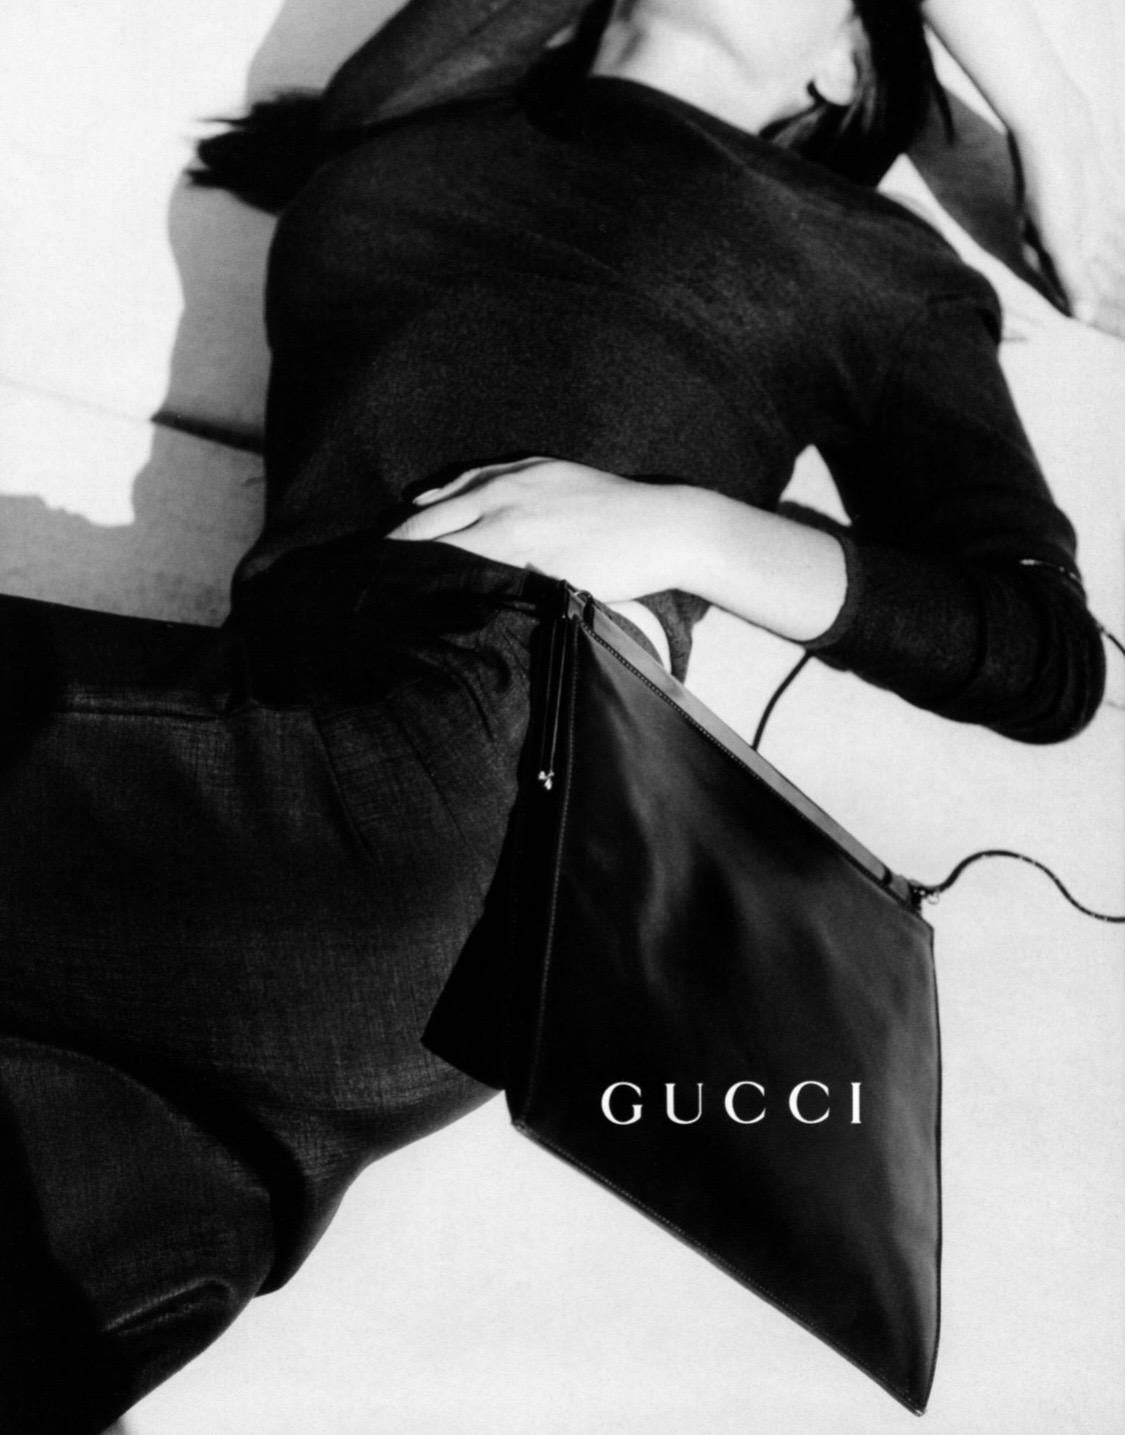 Presenting a convertible leather convertible crossbody designed by Tom Ford for Gucci's Spring/Summer 1997 collection. Debuting in the season's runway presentation, this bag also appeared in the season's ad campaign, shot by Mario Testino. This chic